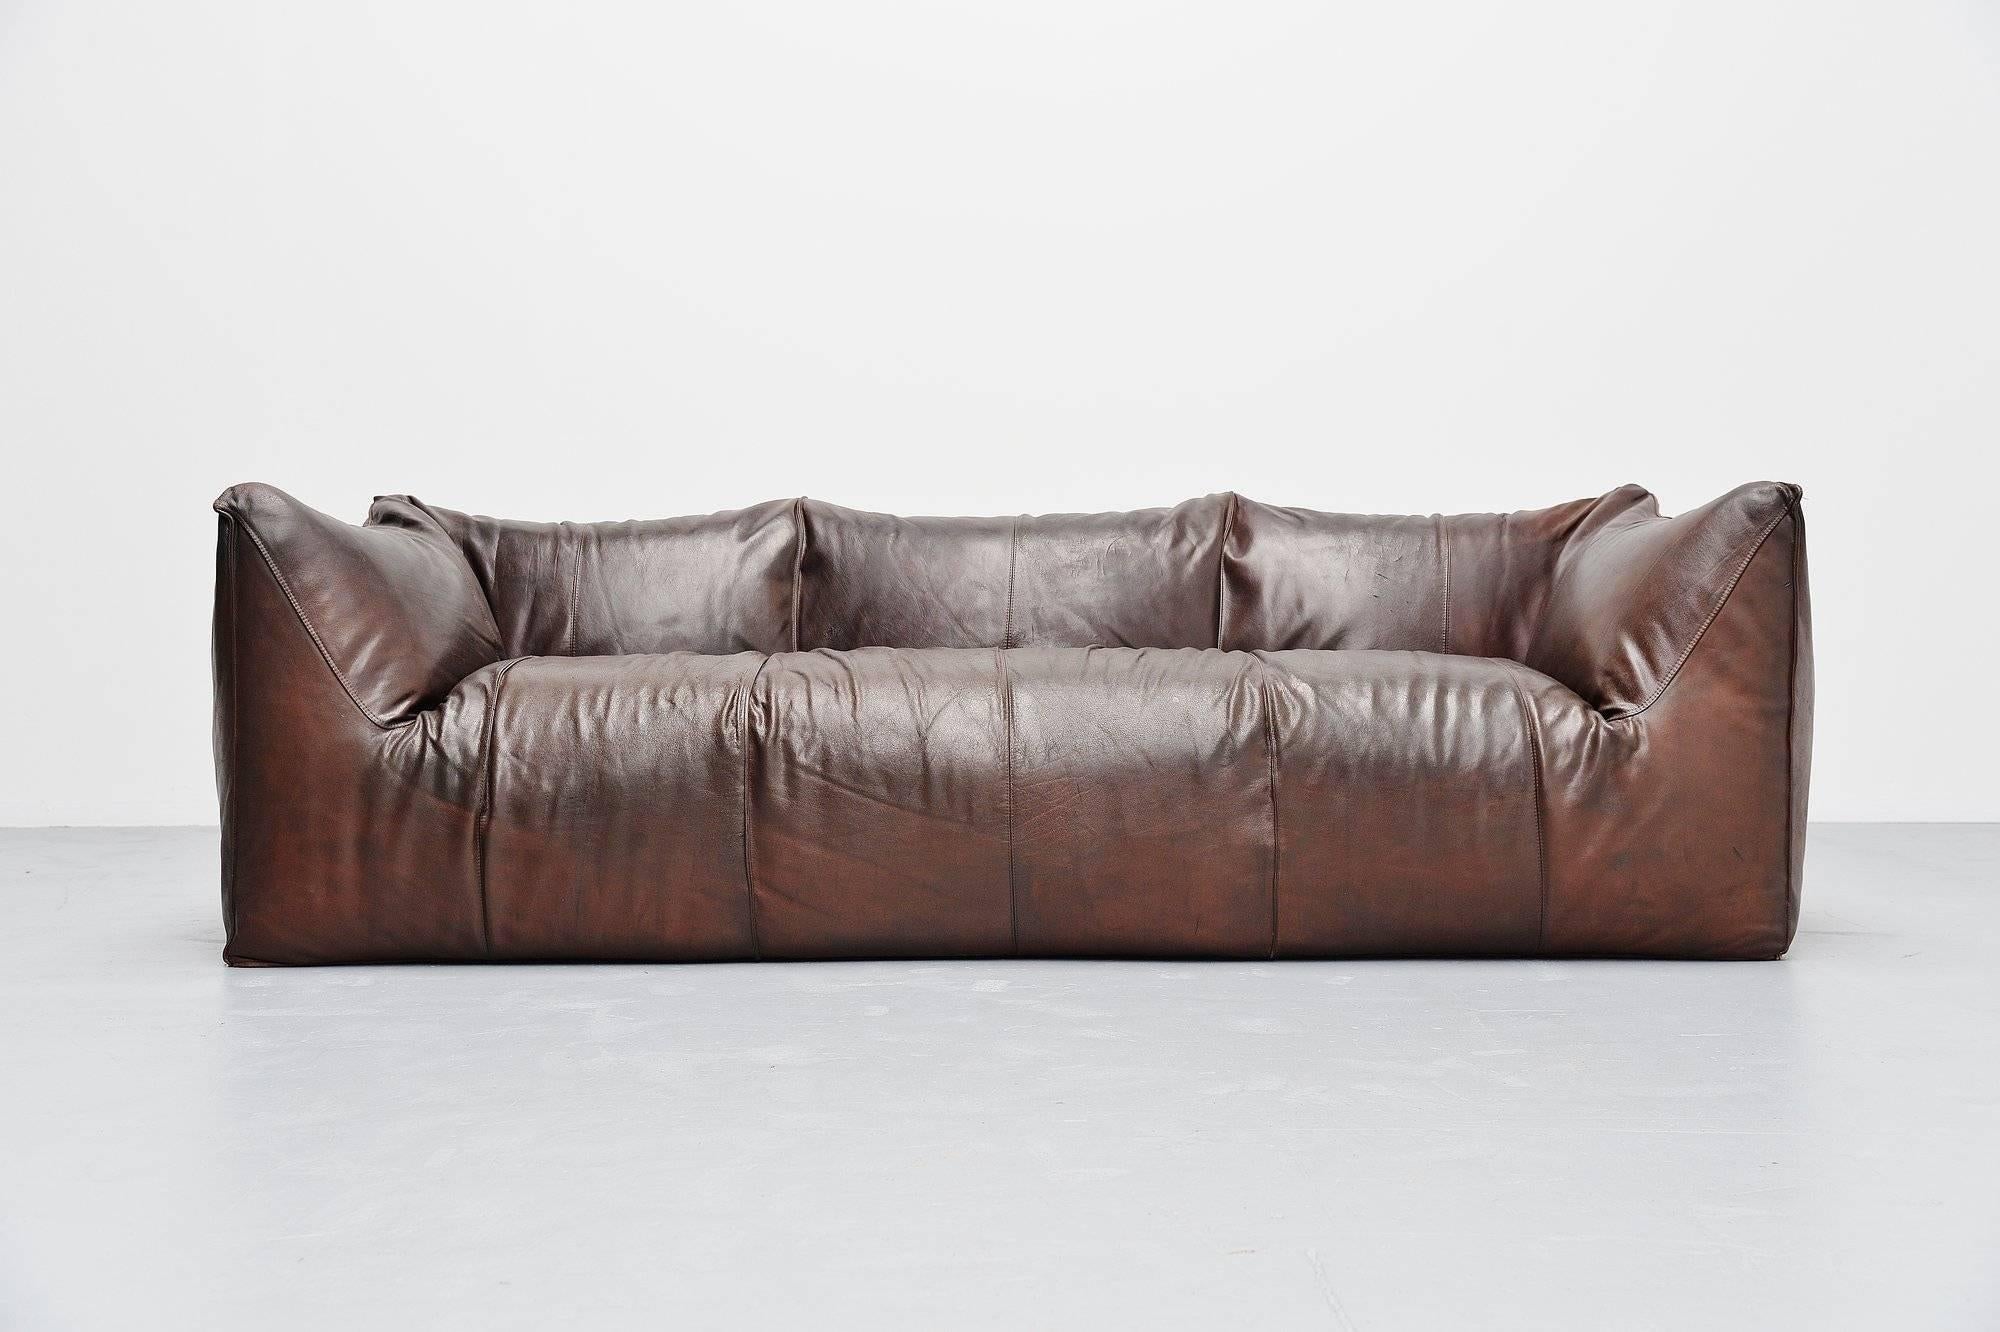 Highly rare and comfortable three-seat 'Bambole' sofa, designed by Mario Bellini for B&B Italia in 1972. Very nice and high quality usable large sofa. Very nice shaped sofa made of very thick and high quality brown buffalo leather. This dark brown